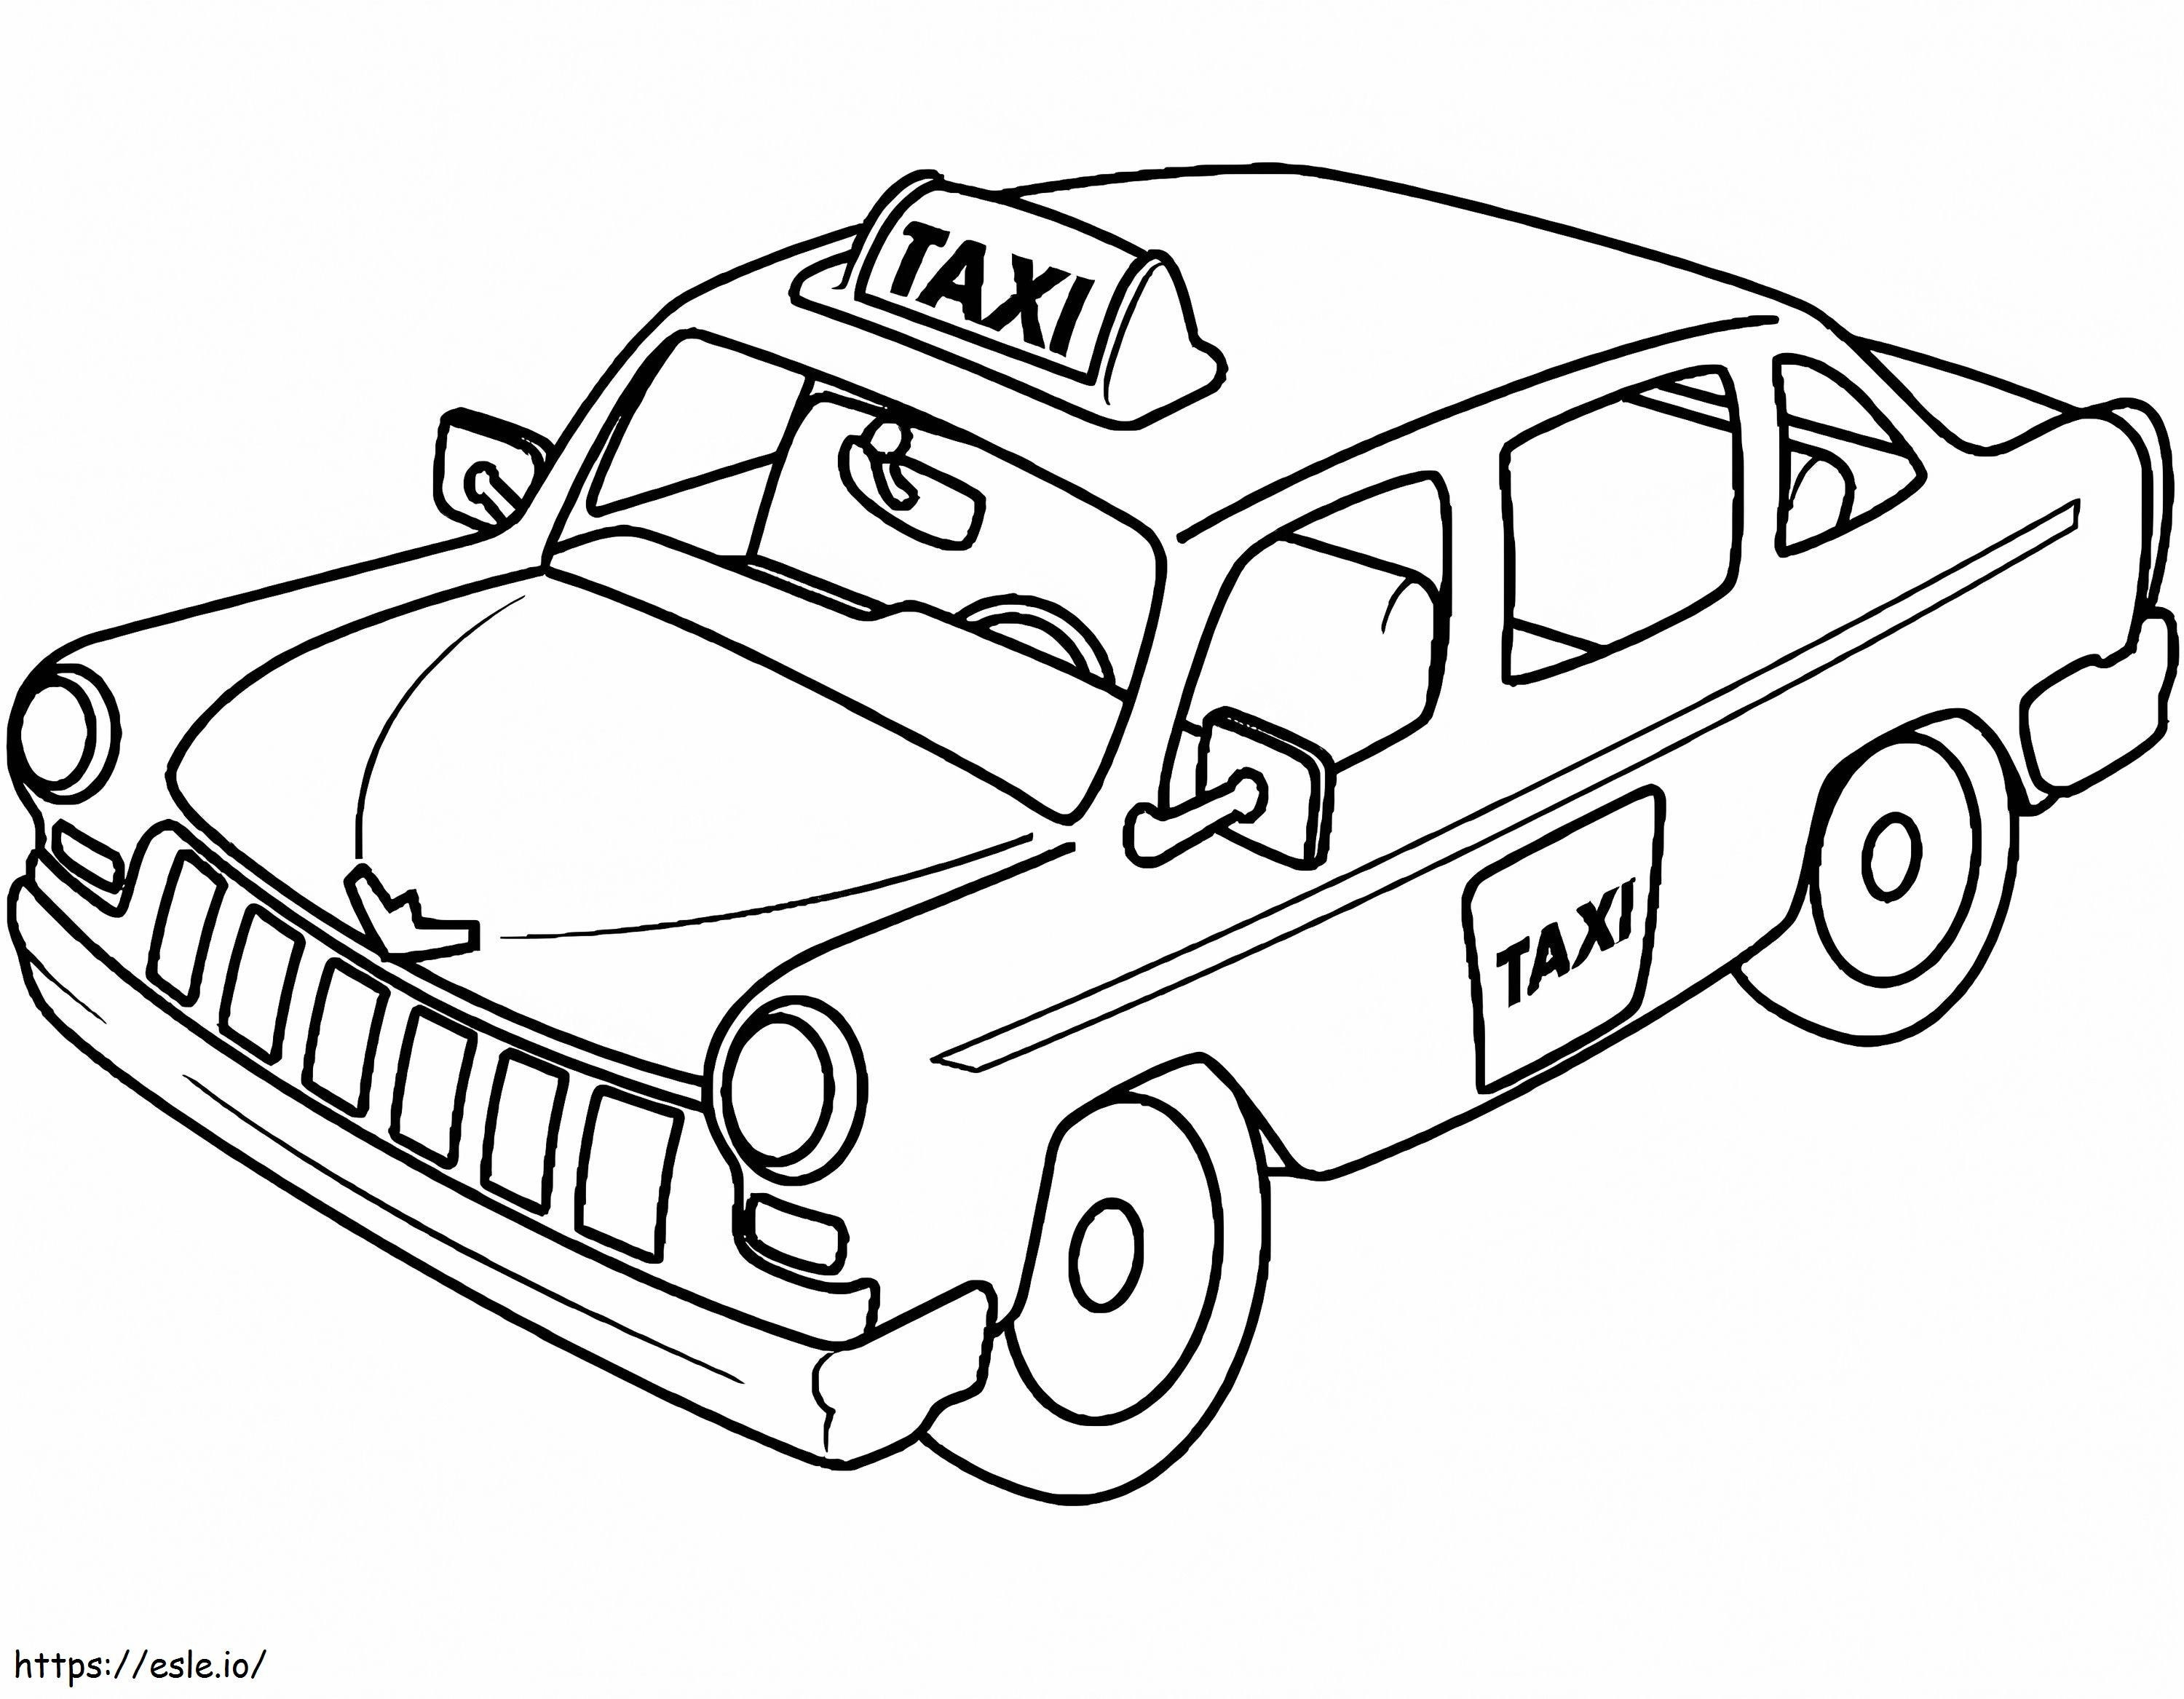 Normal Taxi 2 coloring page